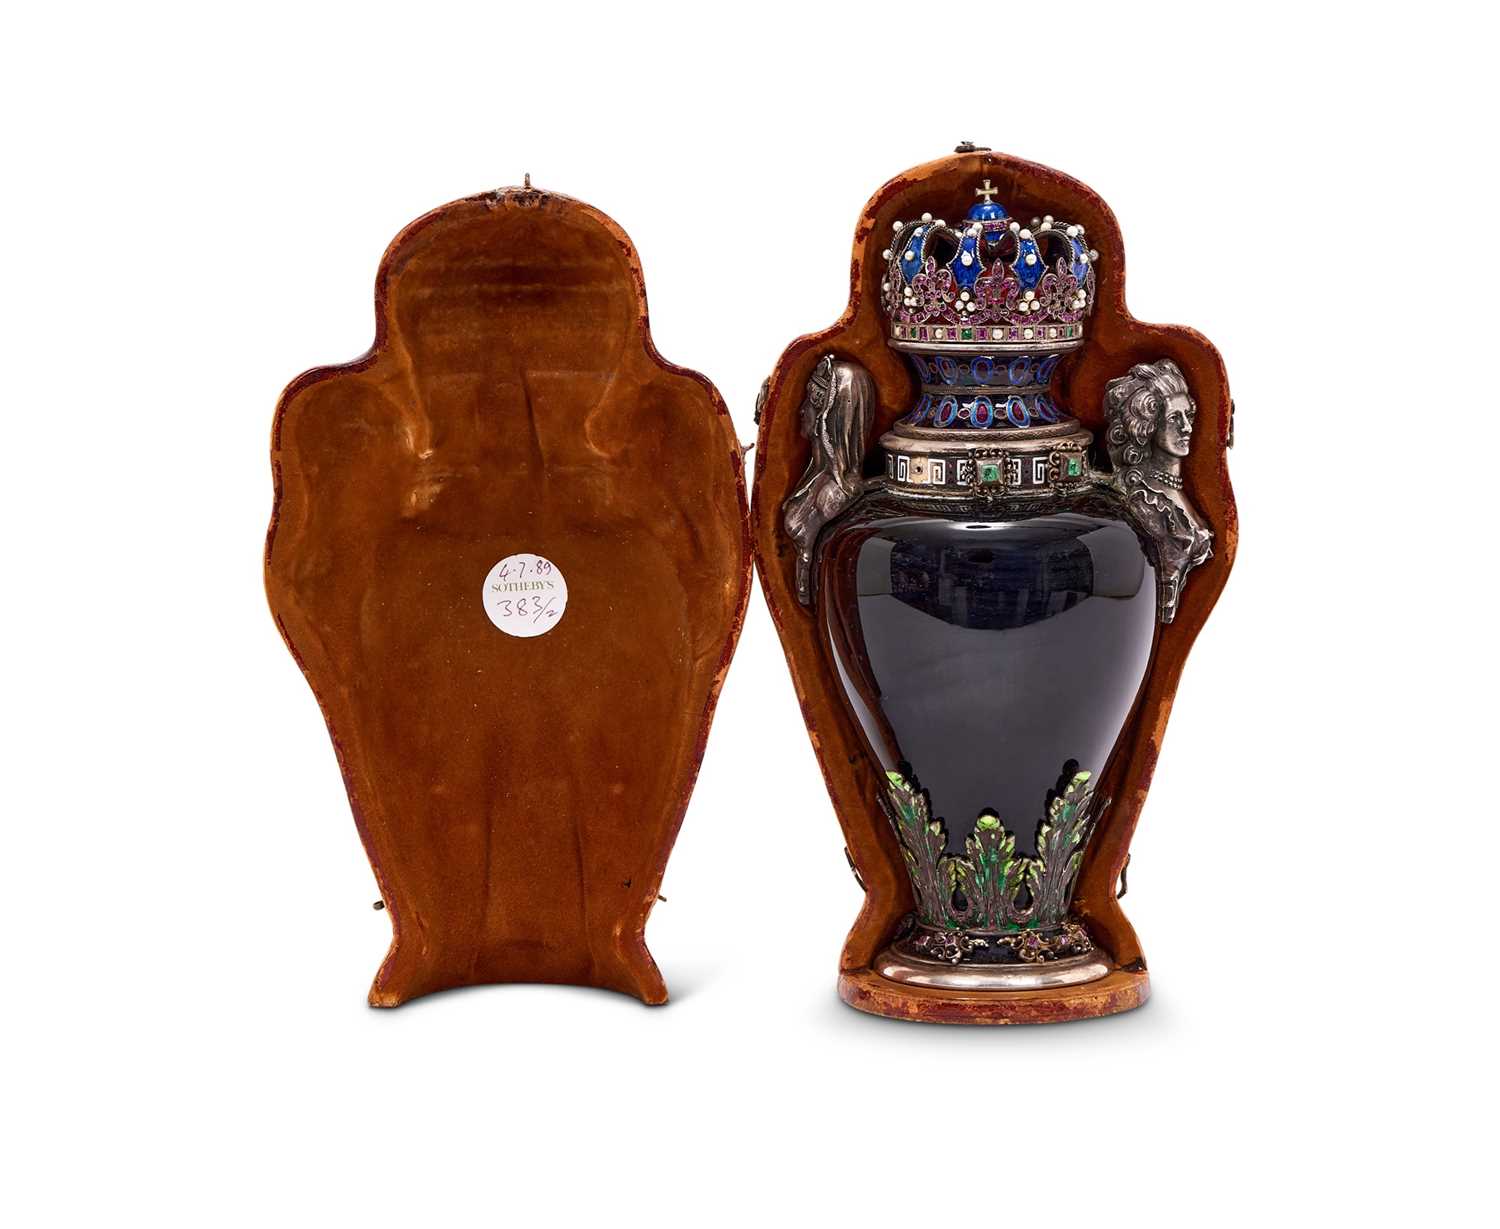 A FINE 19TH CENTURY VIENNESE ENAMEL, SILVER AND JEWELLED URN AND COVER OF ROYAL THEME - Image 3 of 12